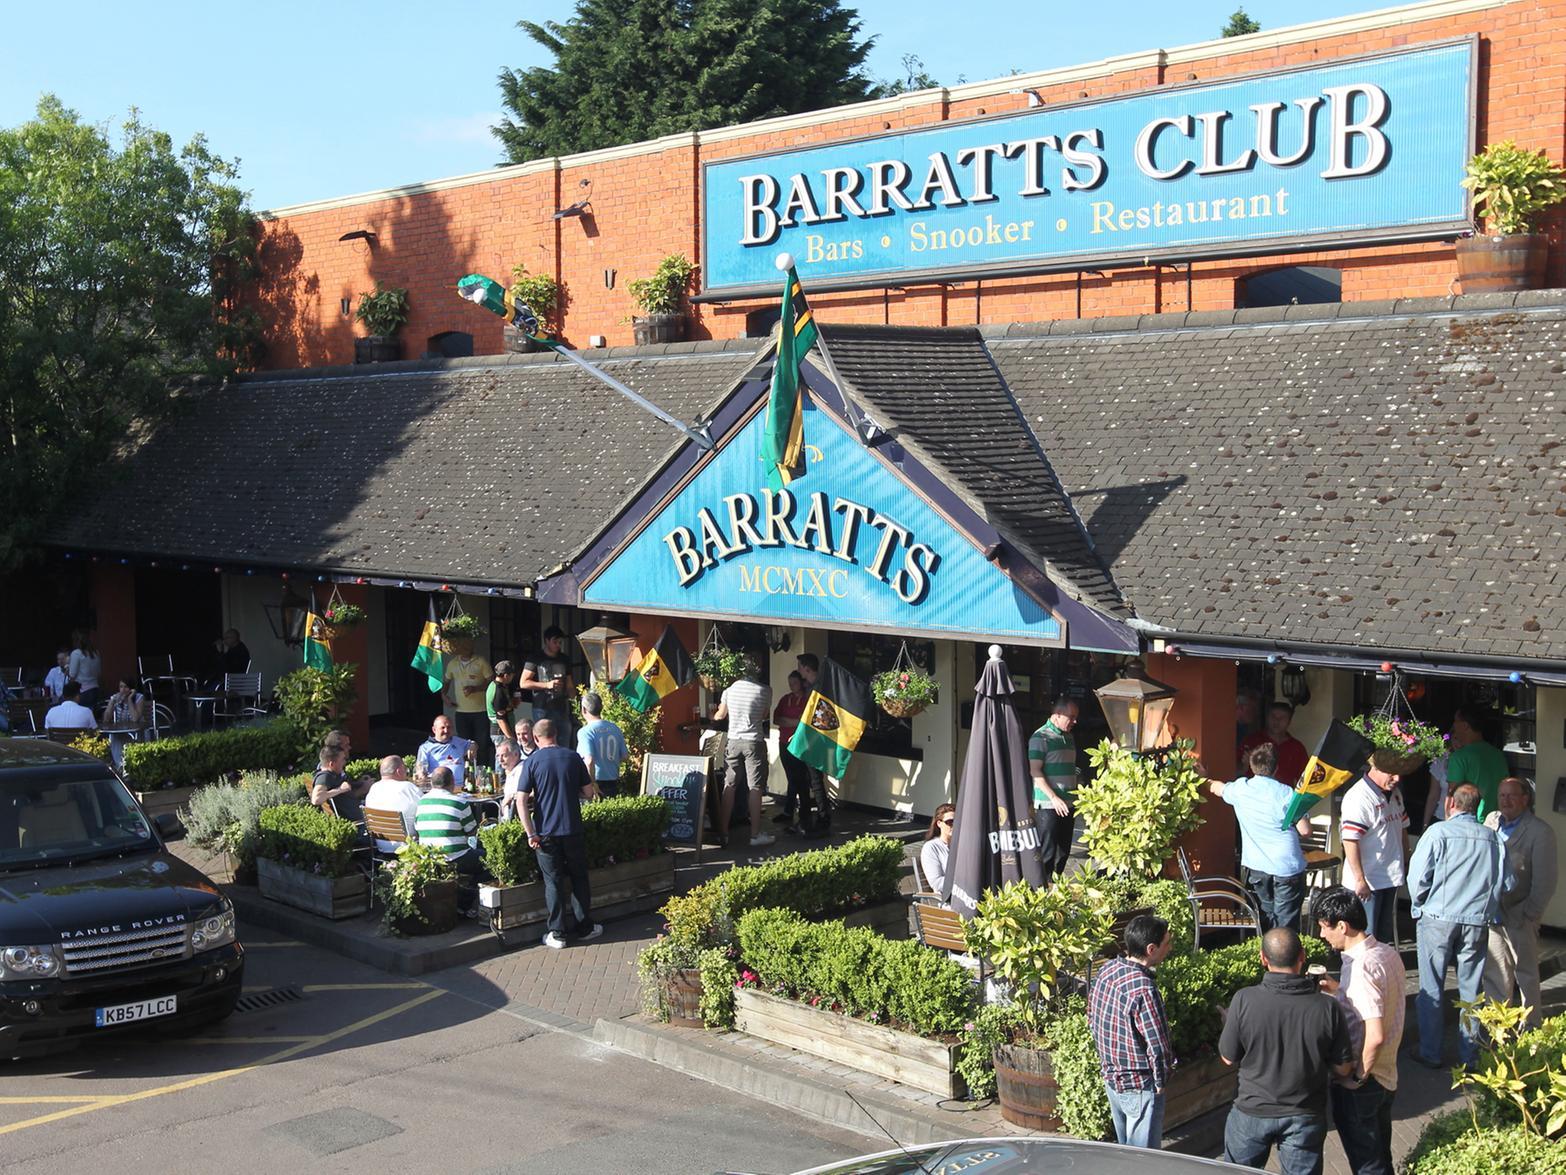 Barratts will be opening at 7am for two hours of build-up for rugby fans